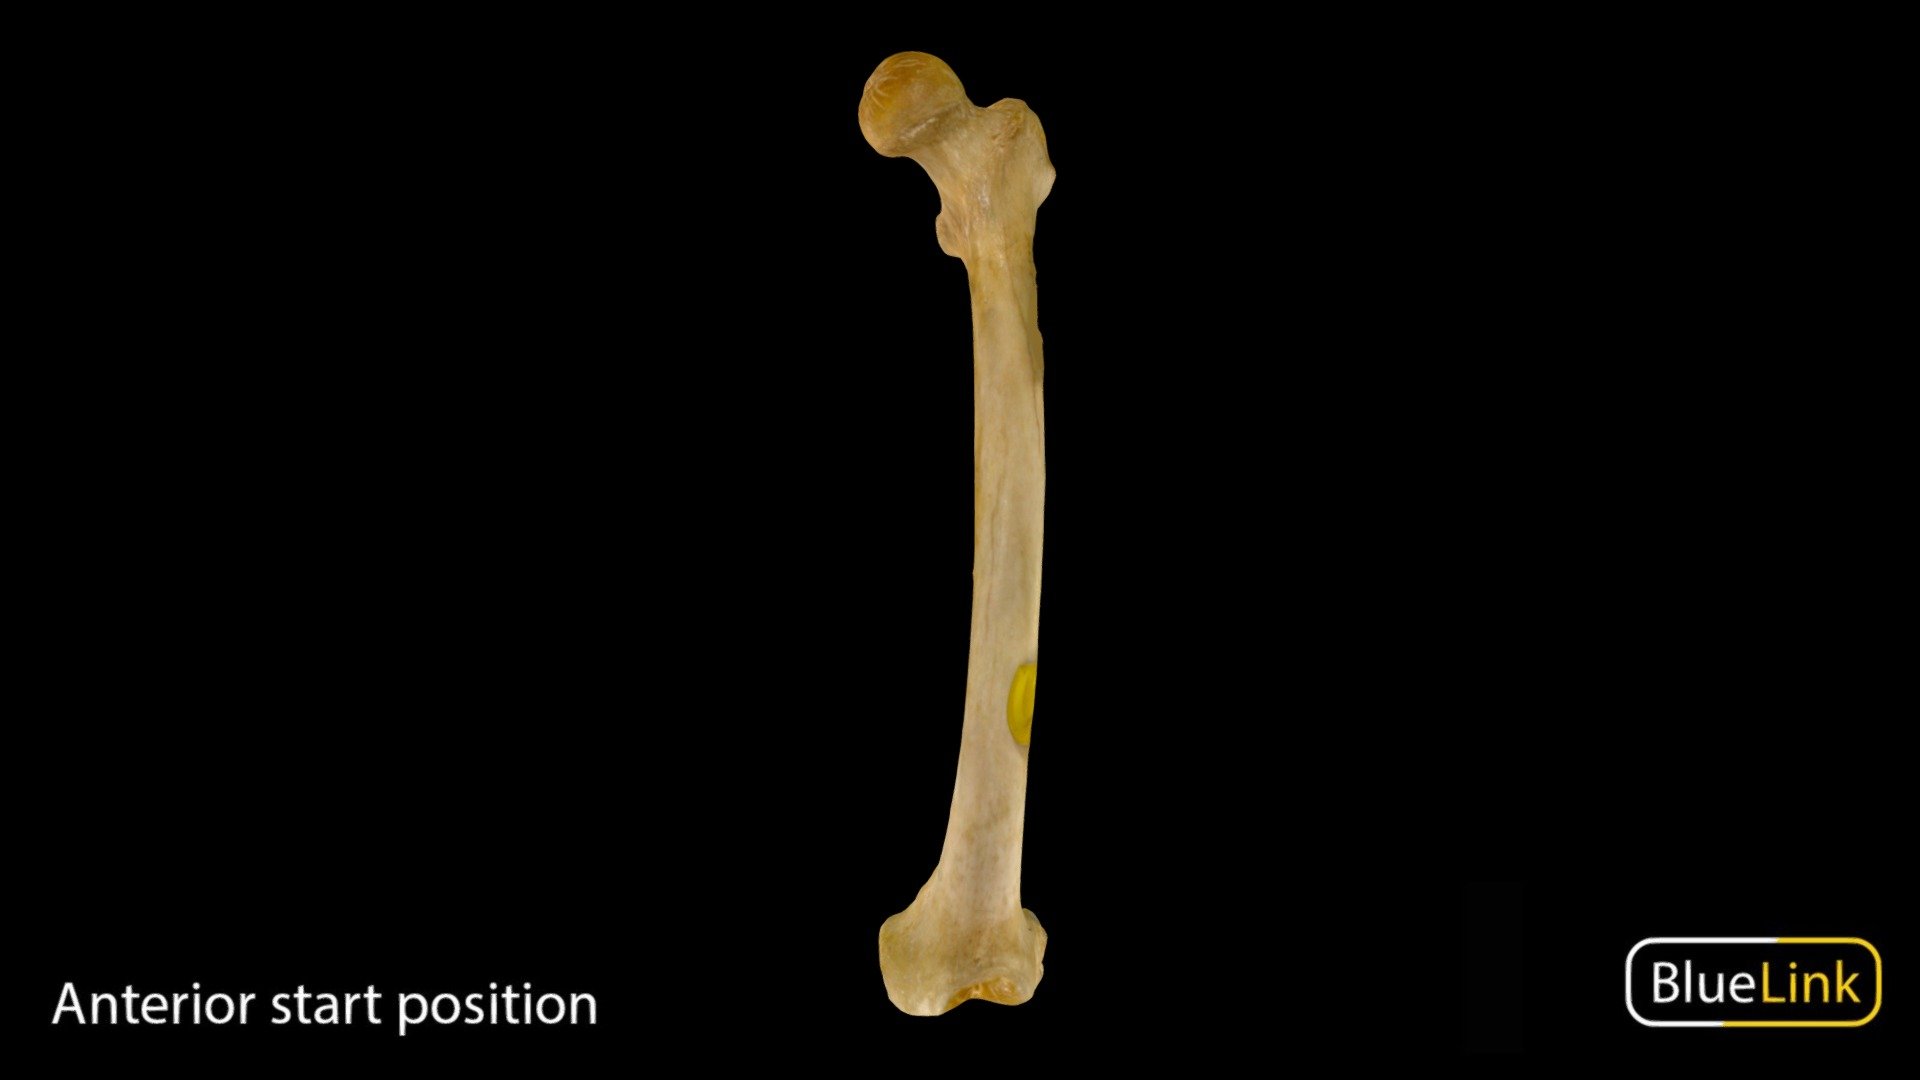 Human femur

Captured with: EinScan Pro

Captured and edited by: Cristina Prall

University of Michigan - Femur - 3D model by Bluelink Anatomy - University of Michigan (@bluelinkanatomy) 3d model